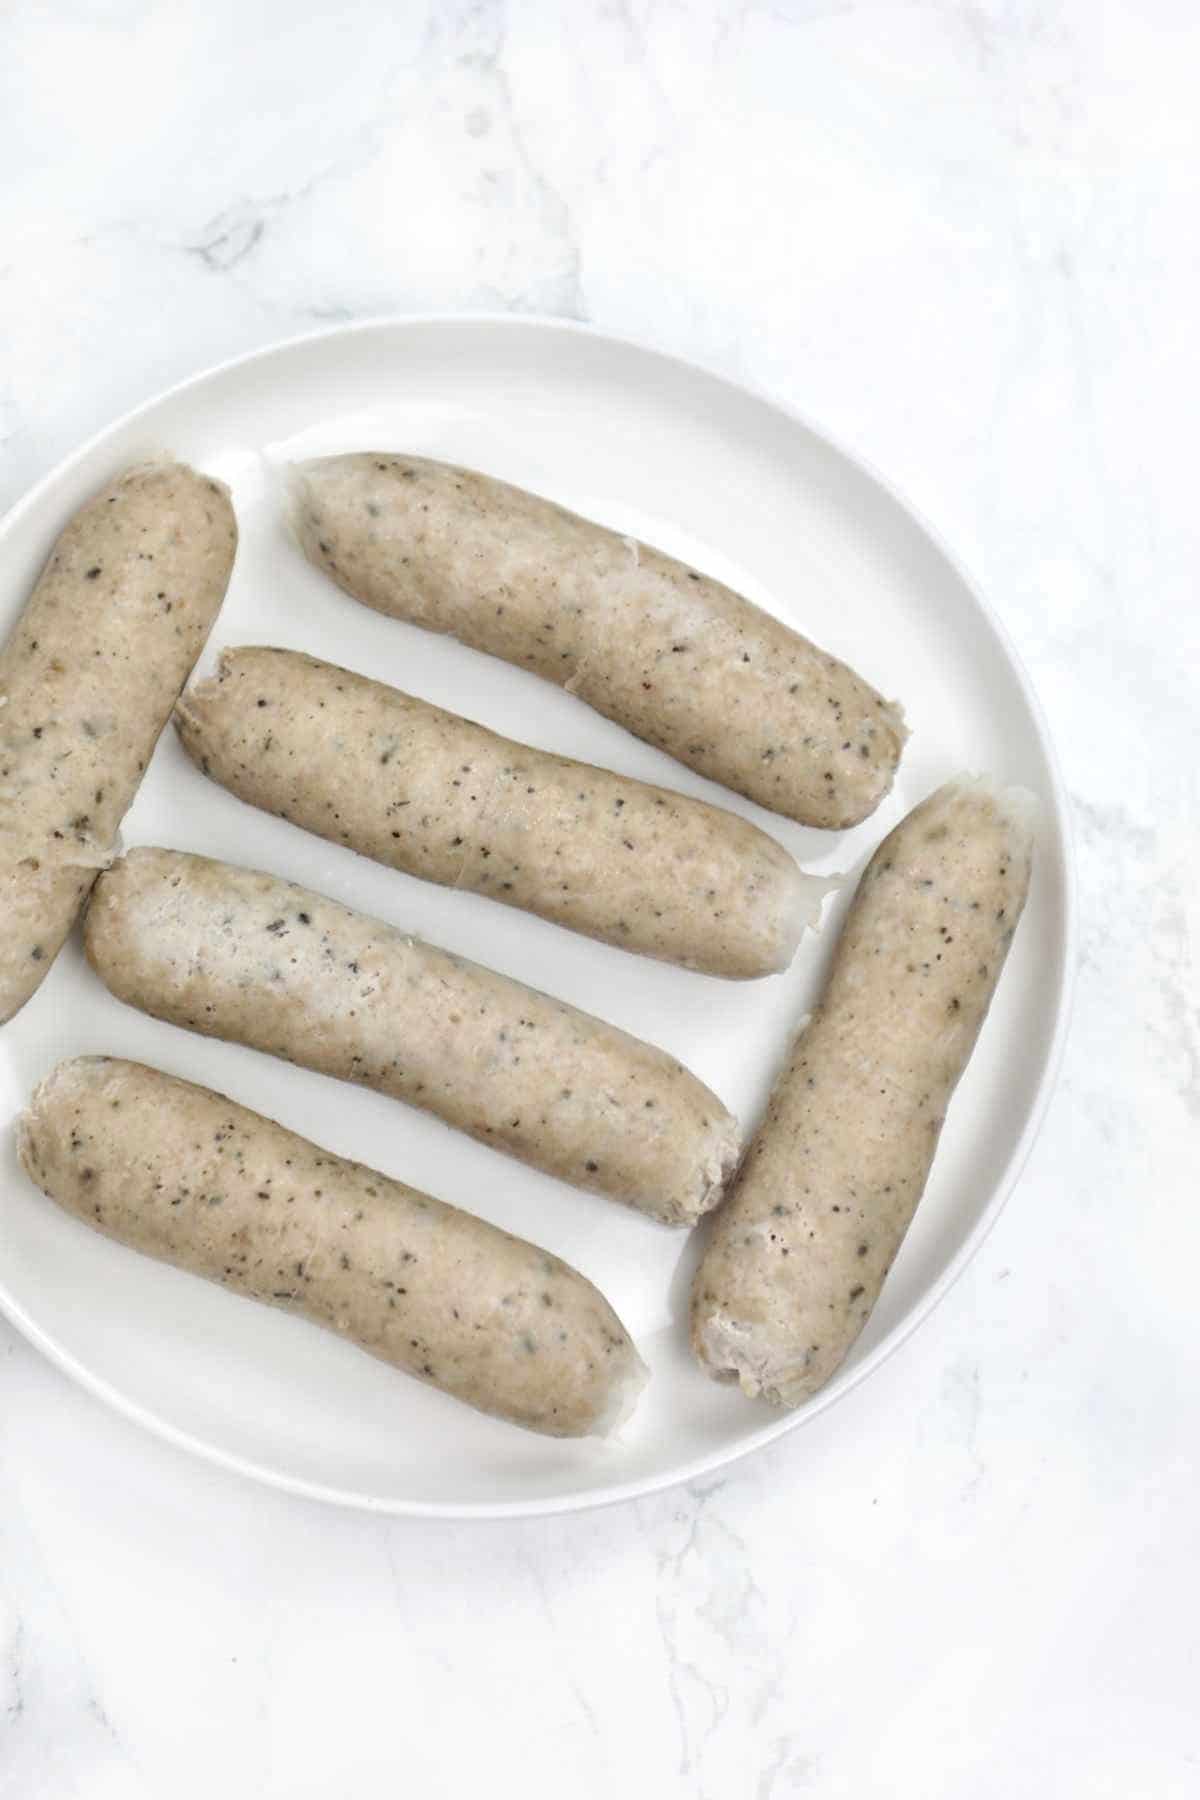 sausages on a plate.